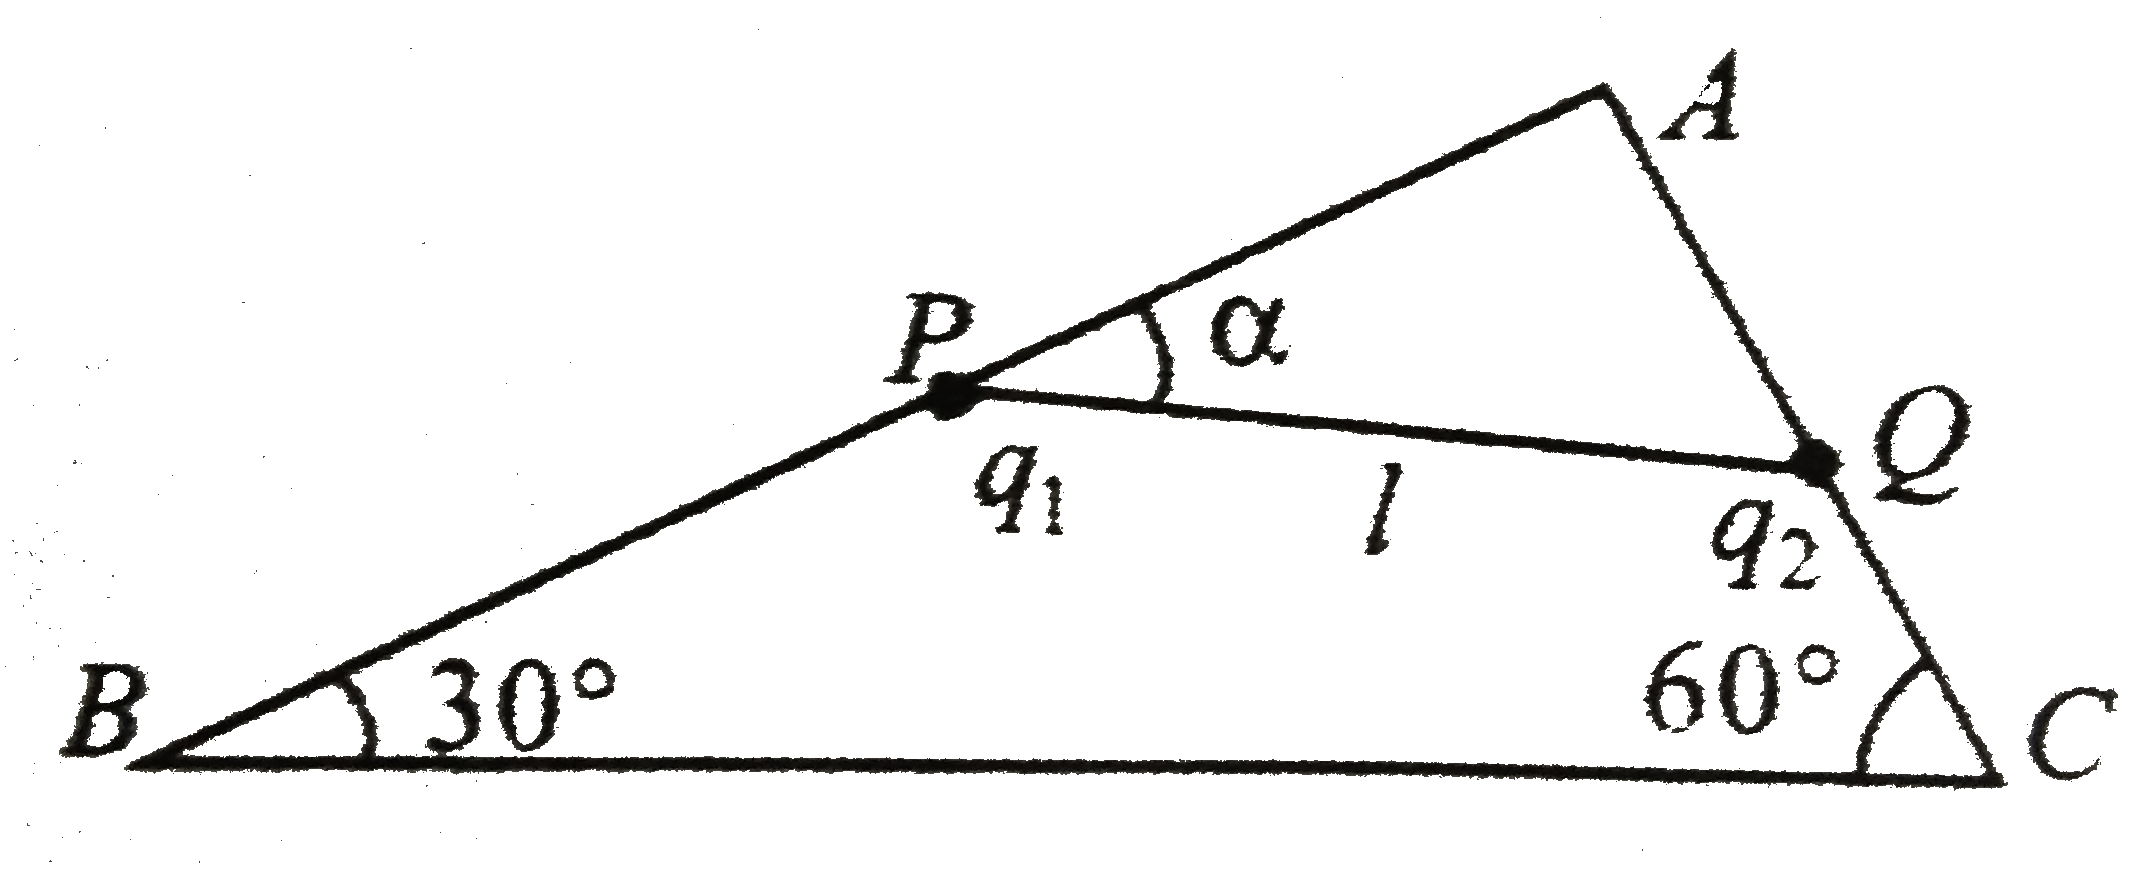 A rigid insulated wire frame in the form of a right-angled triangle ABC is set in a vertical plane as shown in fig. two beads of equal masses m each and carrying charges q(1) and q(2) are connected by a cord of length l and can slide without friction on the wires.   Cinsidering the case when the beads are stationary, determine   (i) the angel alpha   (ii) the tension in the cord, and   (iii) The normal recation on teh beads.   If the cord is now cut, what are the value of the charges for which the beads continue to remain stationary?